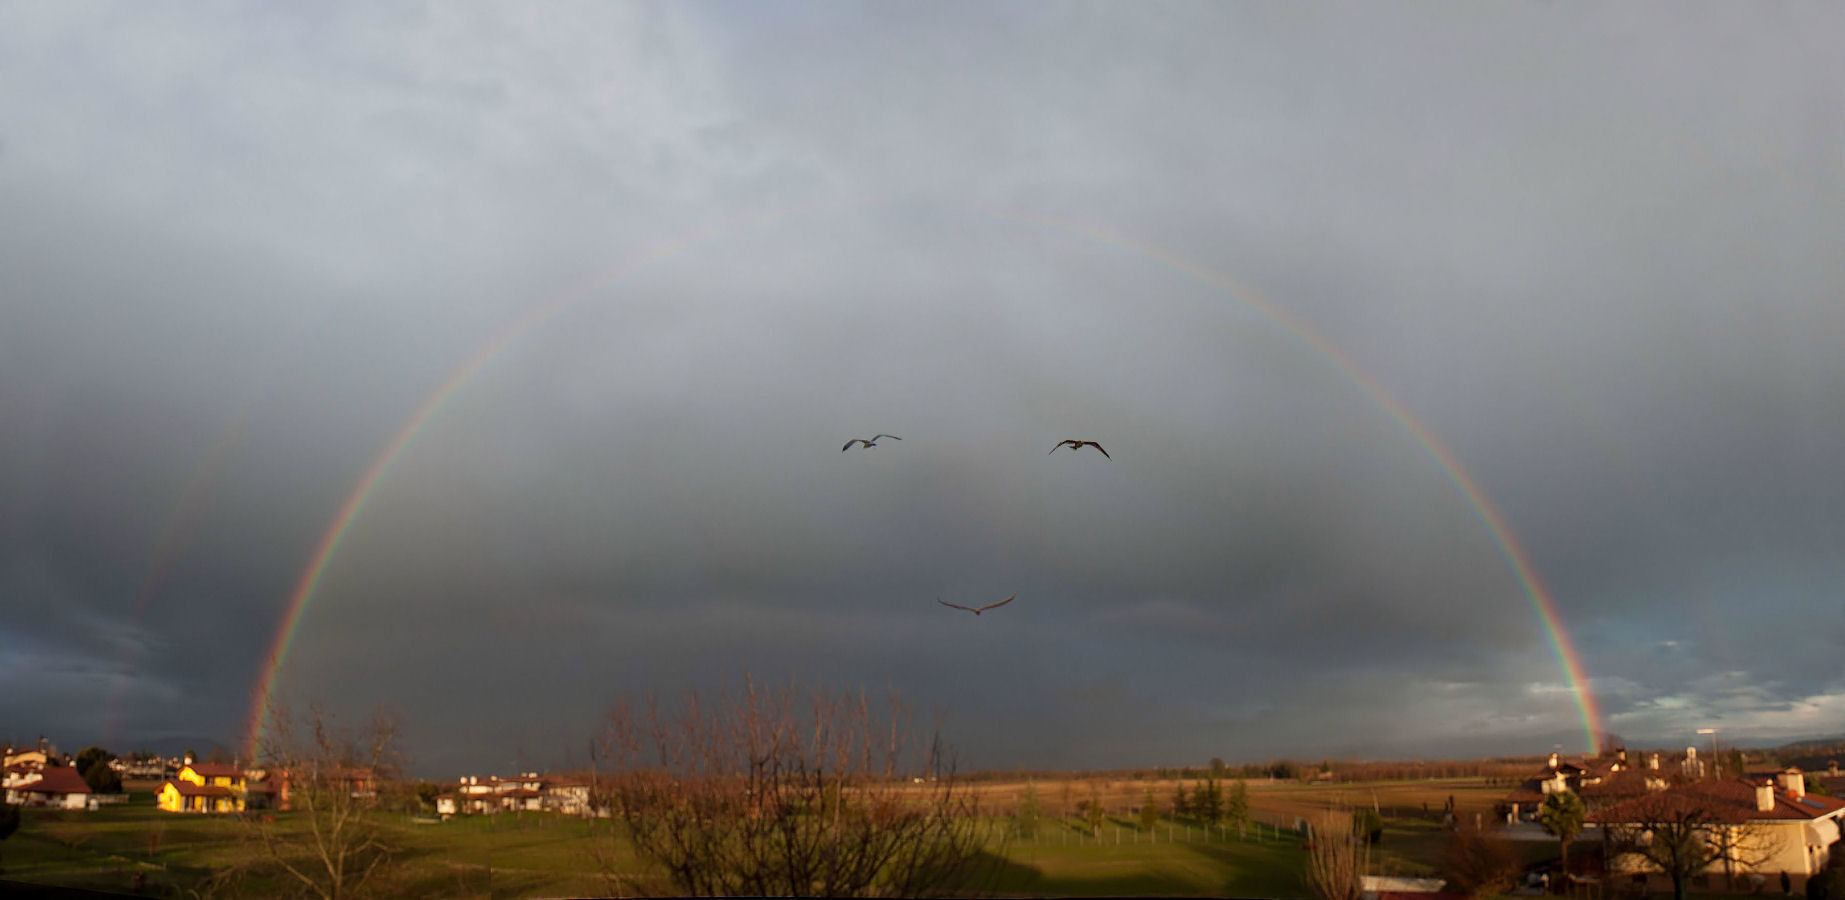 Double rainbow: 124 KB; click on the image to enlarge